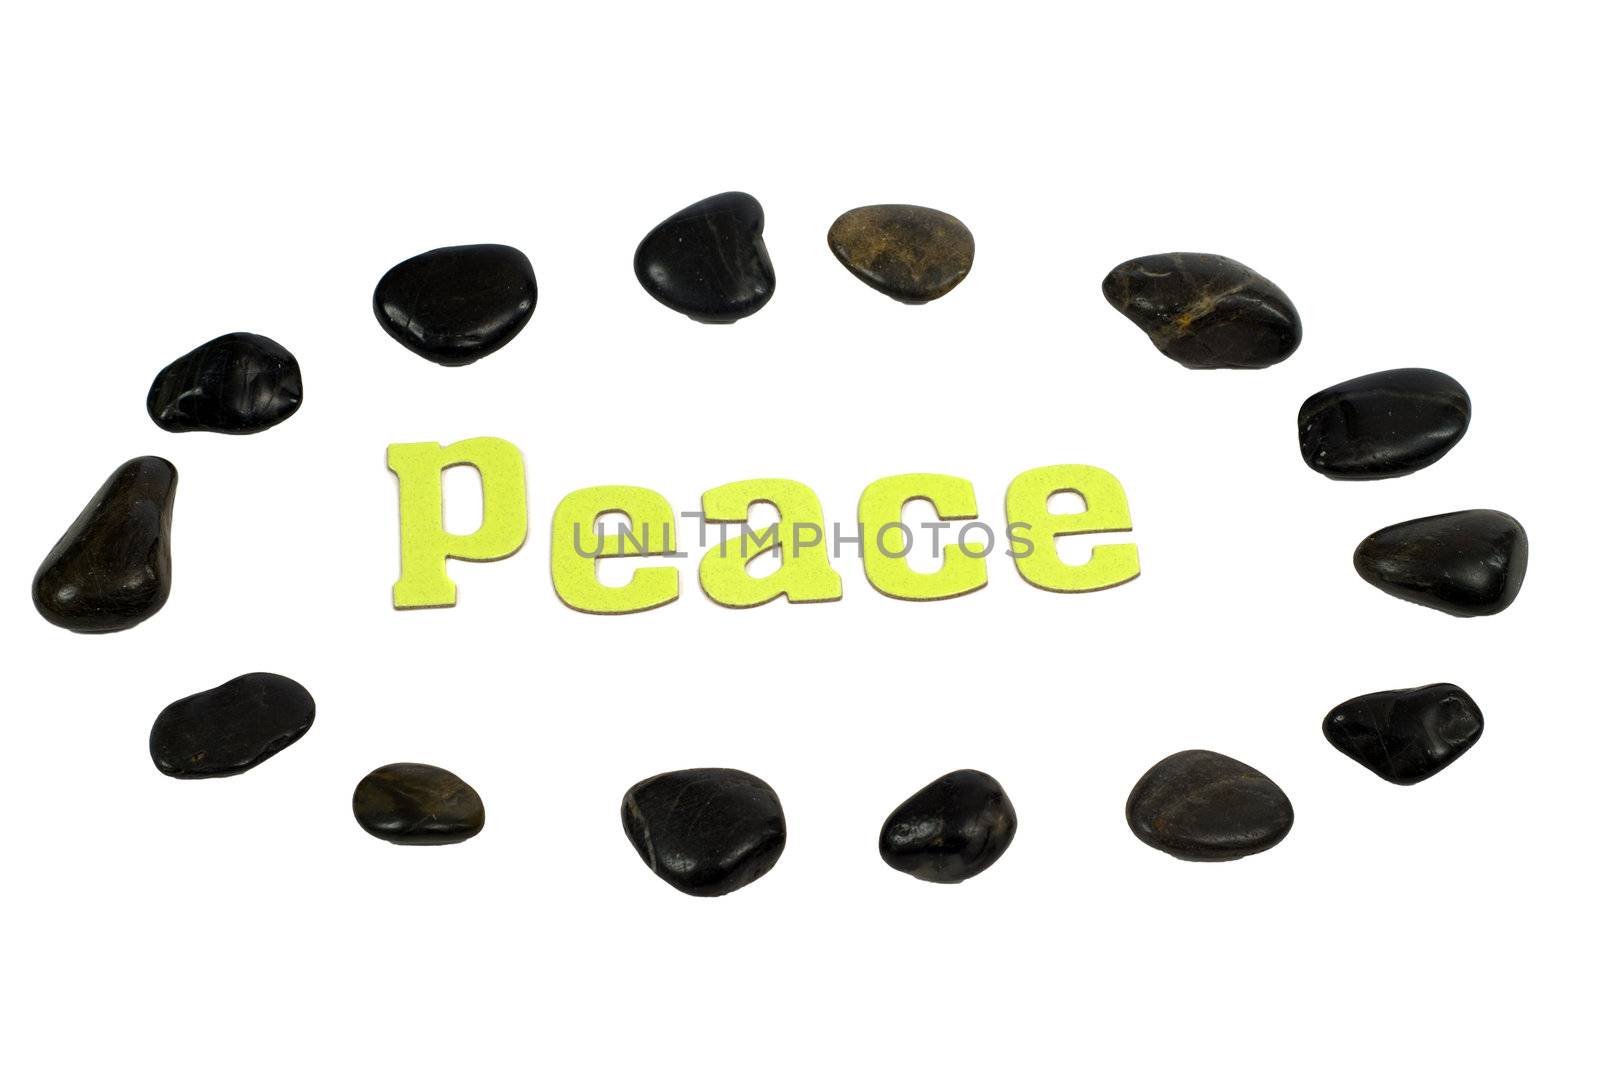 Peace concept with the word peace, surrounded by relaxing river rocks, isolated against a white background